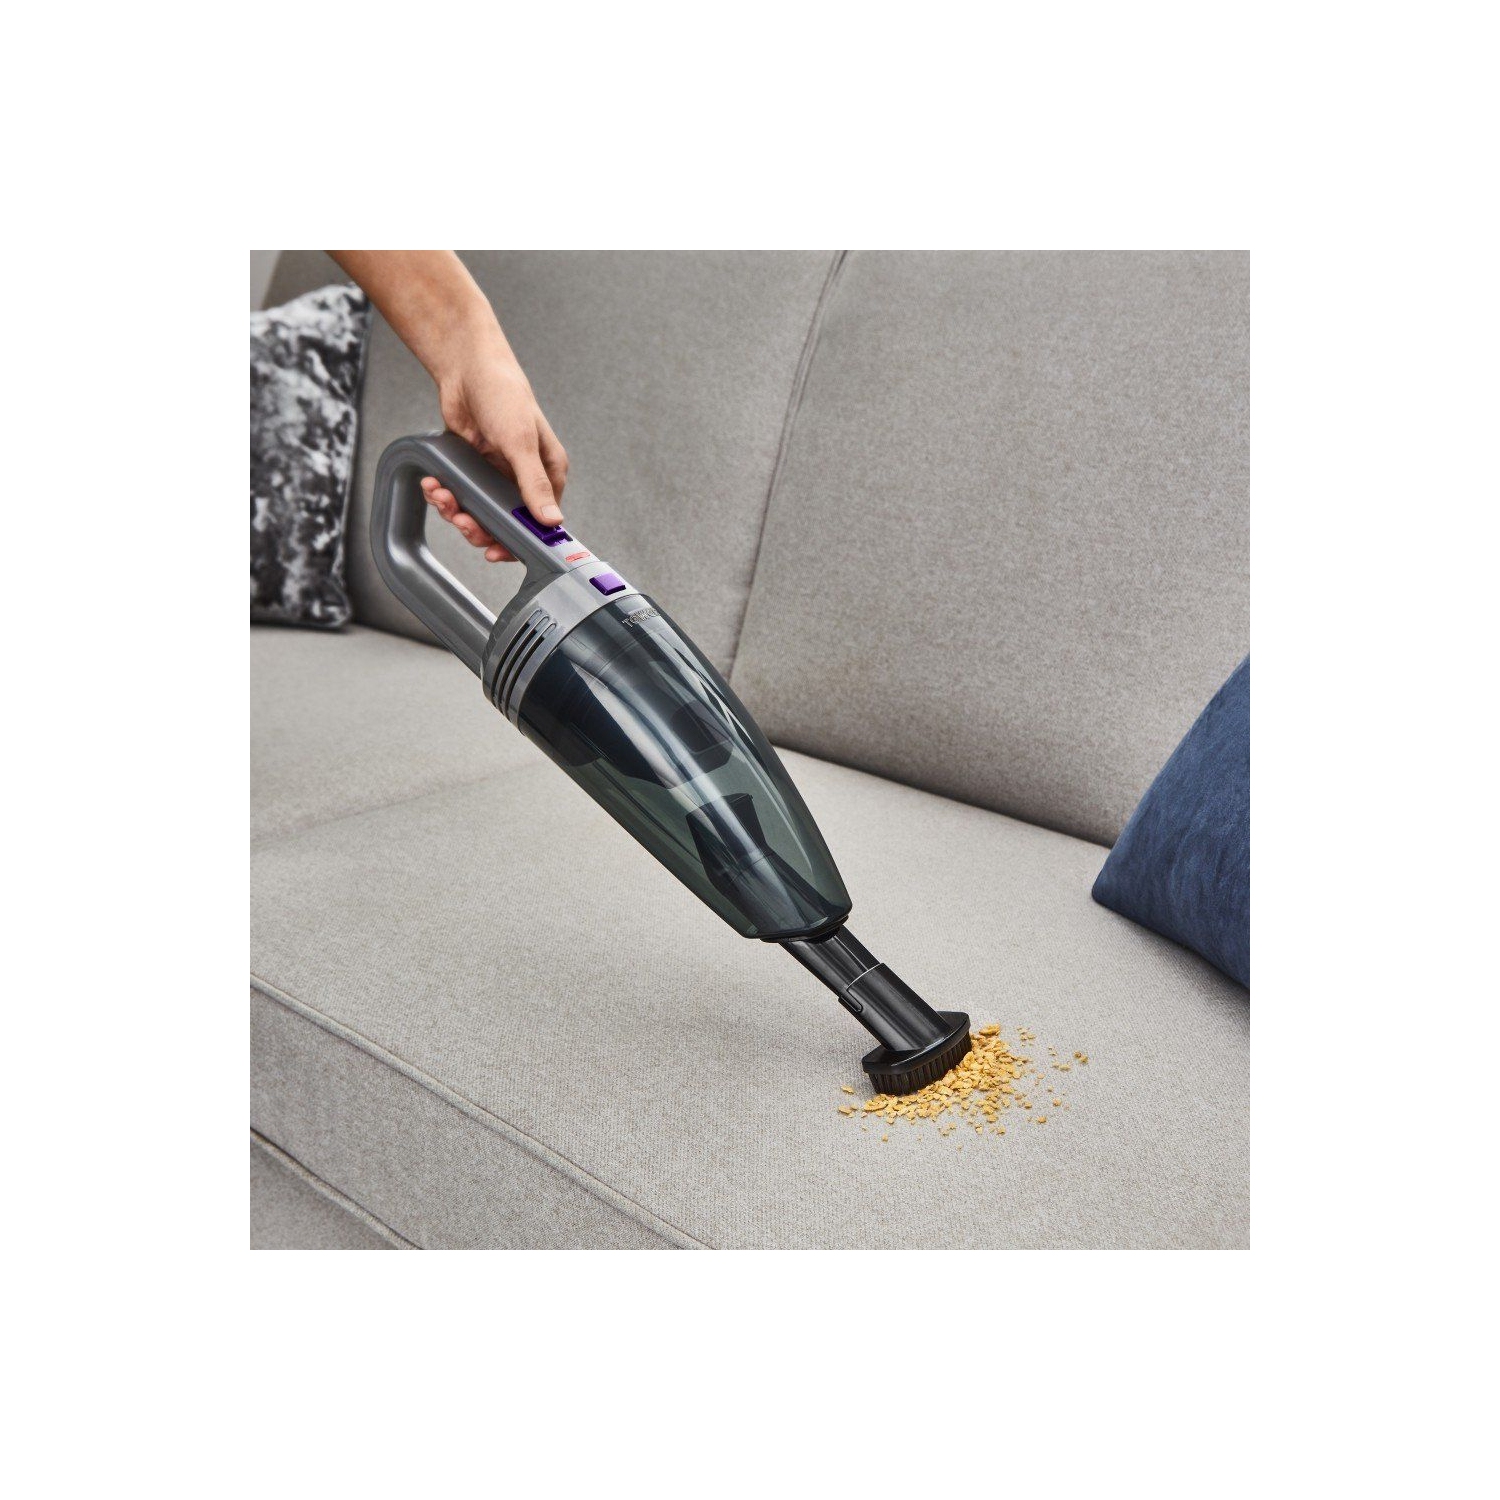 Tower Cordless Handheld Cleaner - 1